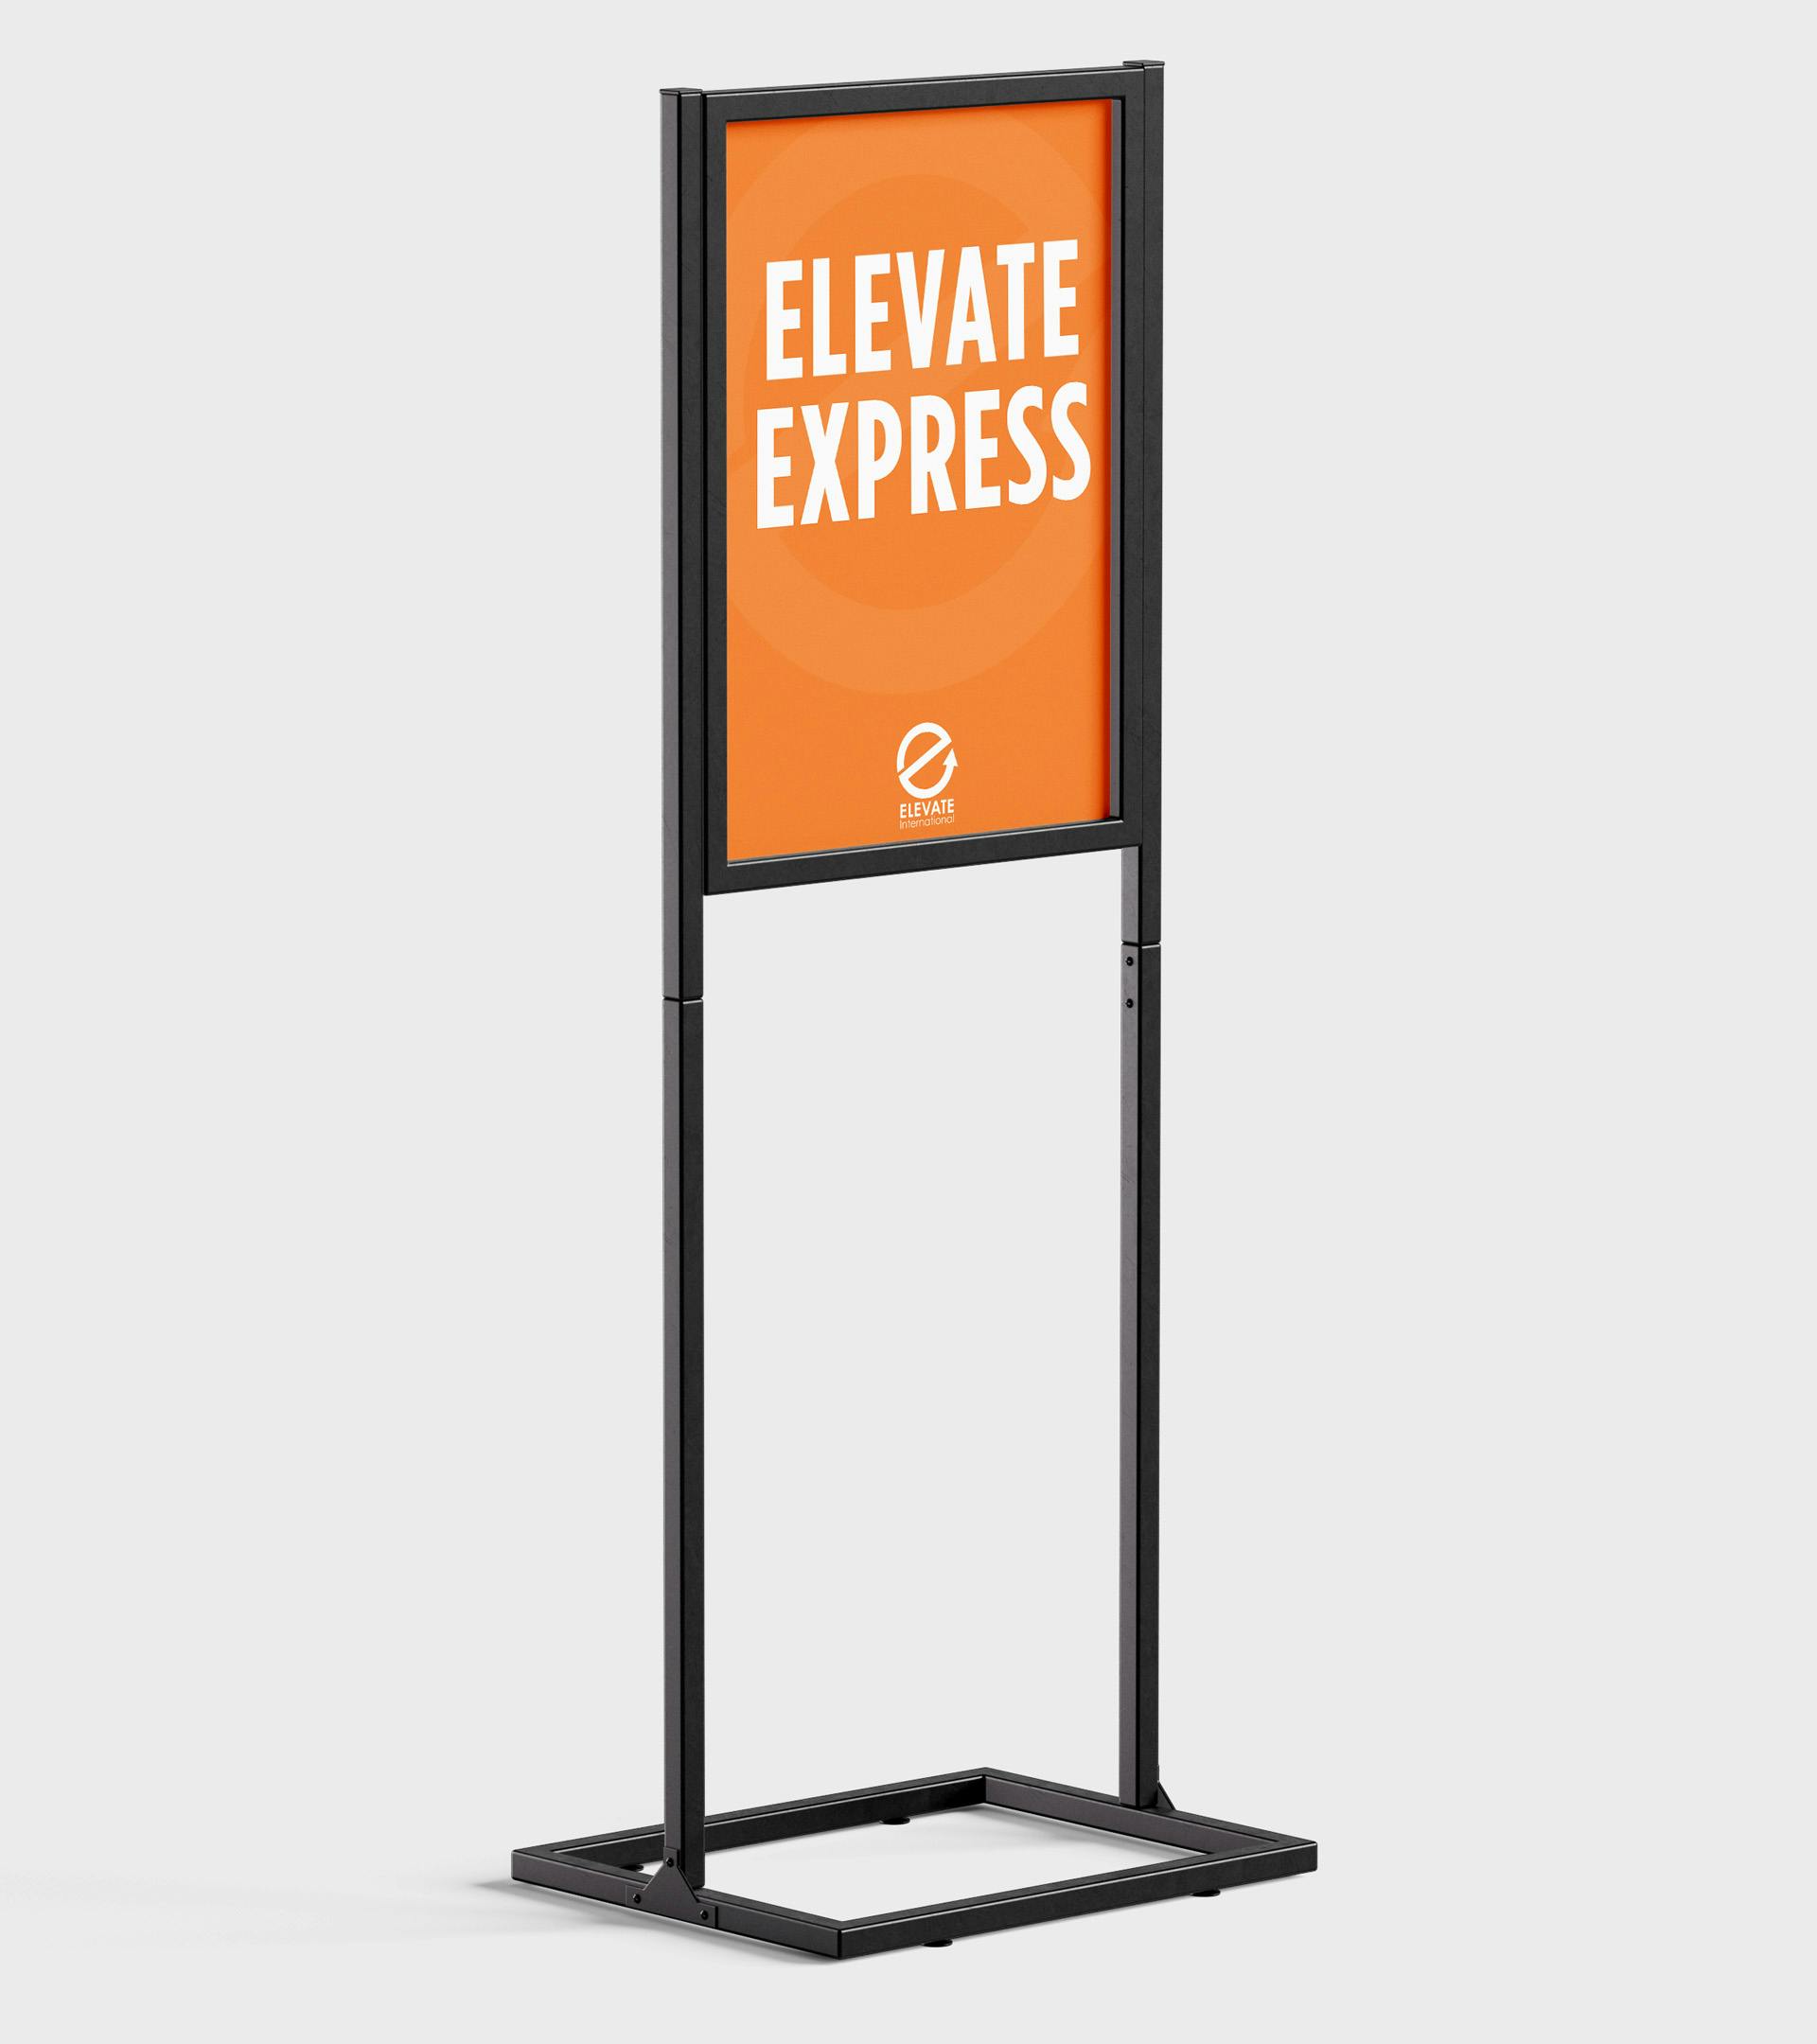 Picture of a sign that says "Elevate Express"